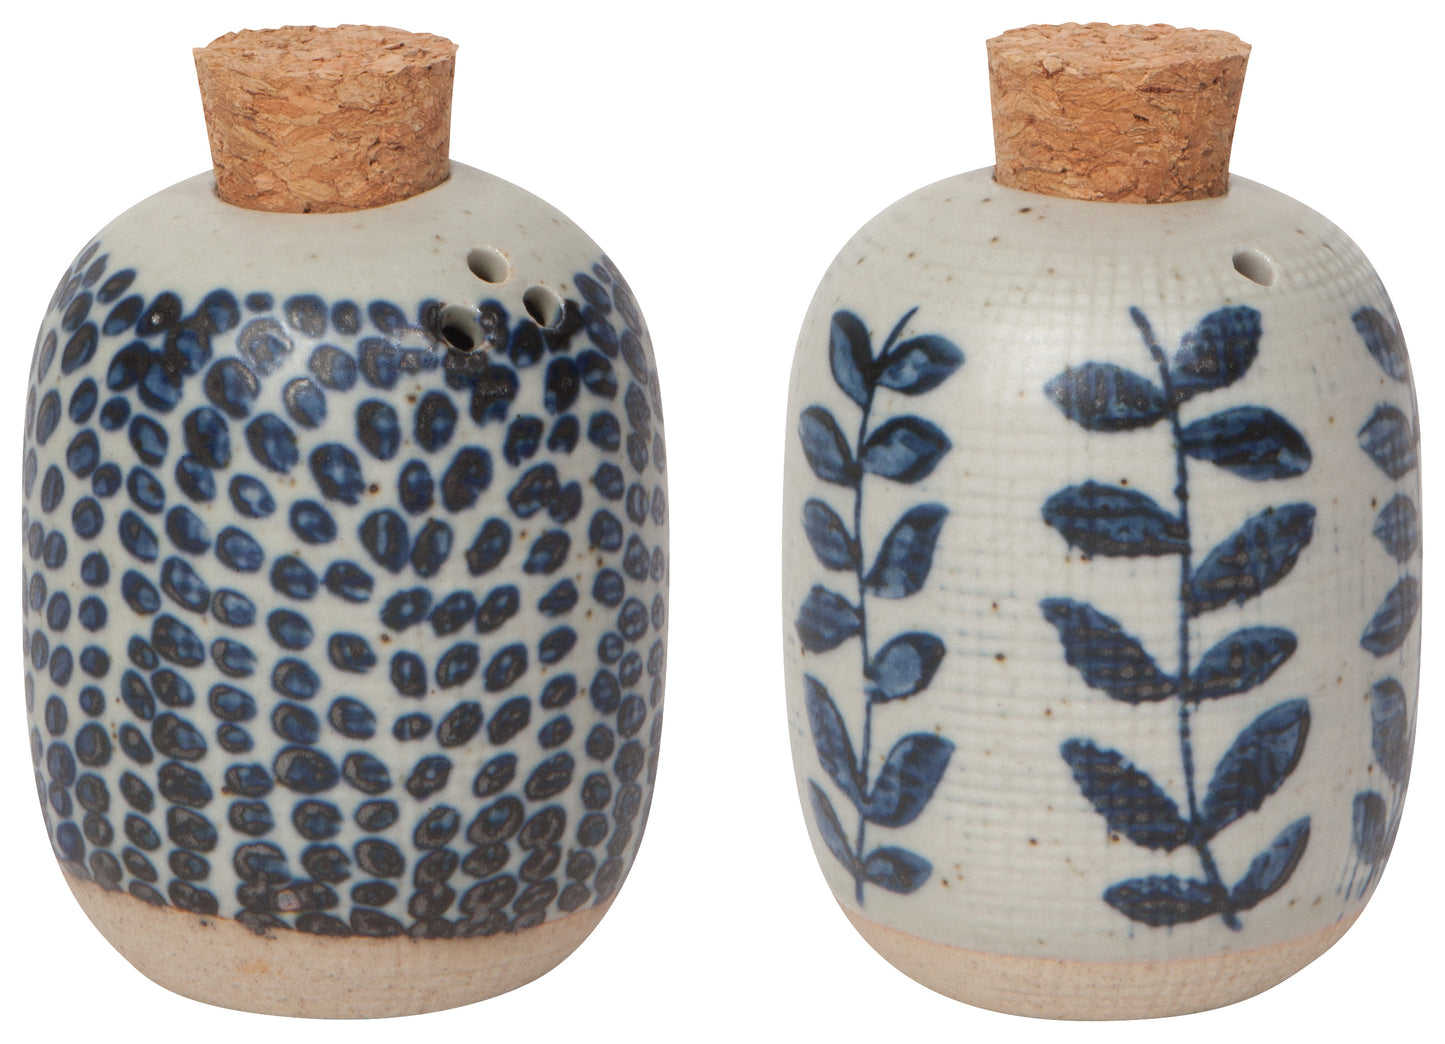 2 shakers with blue patterns and cork stoppers on top.